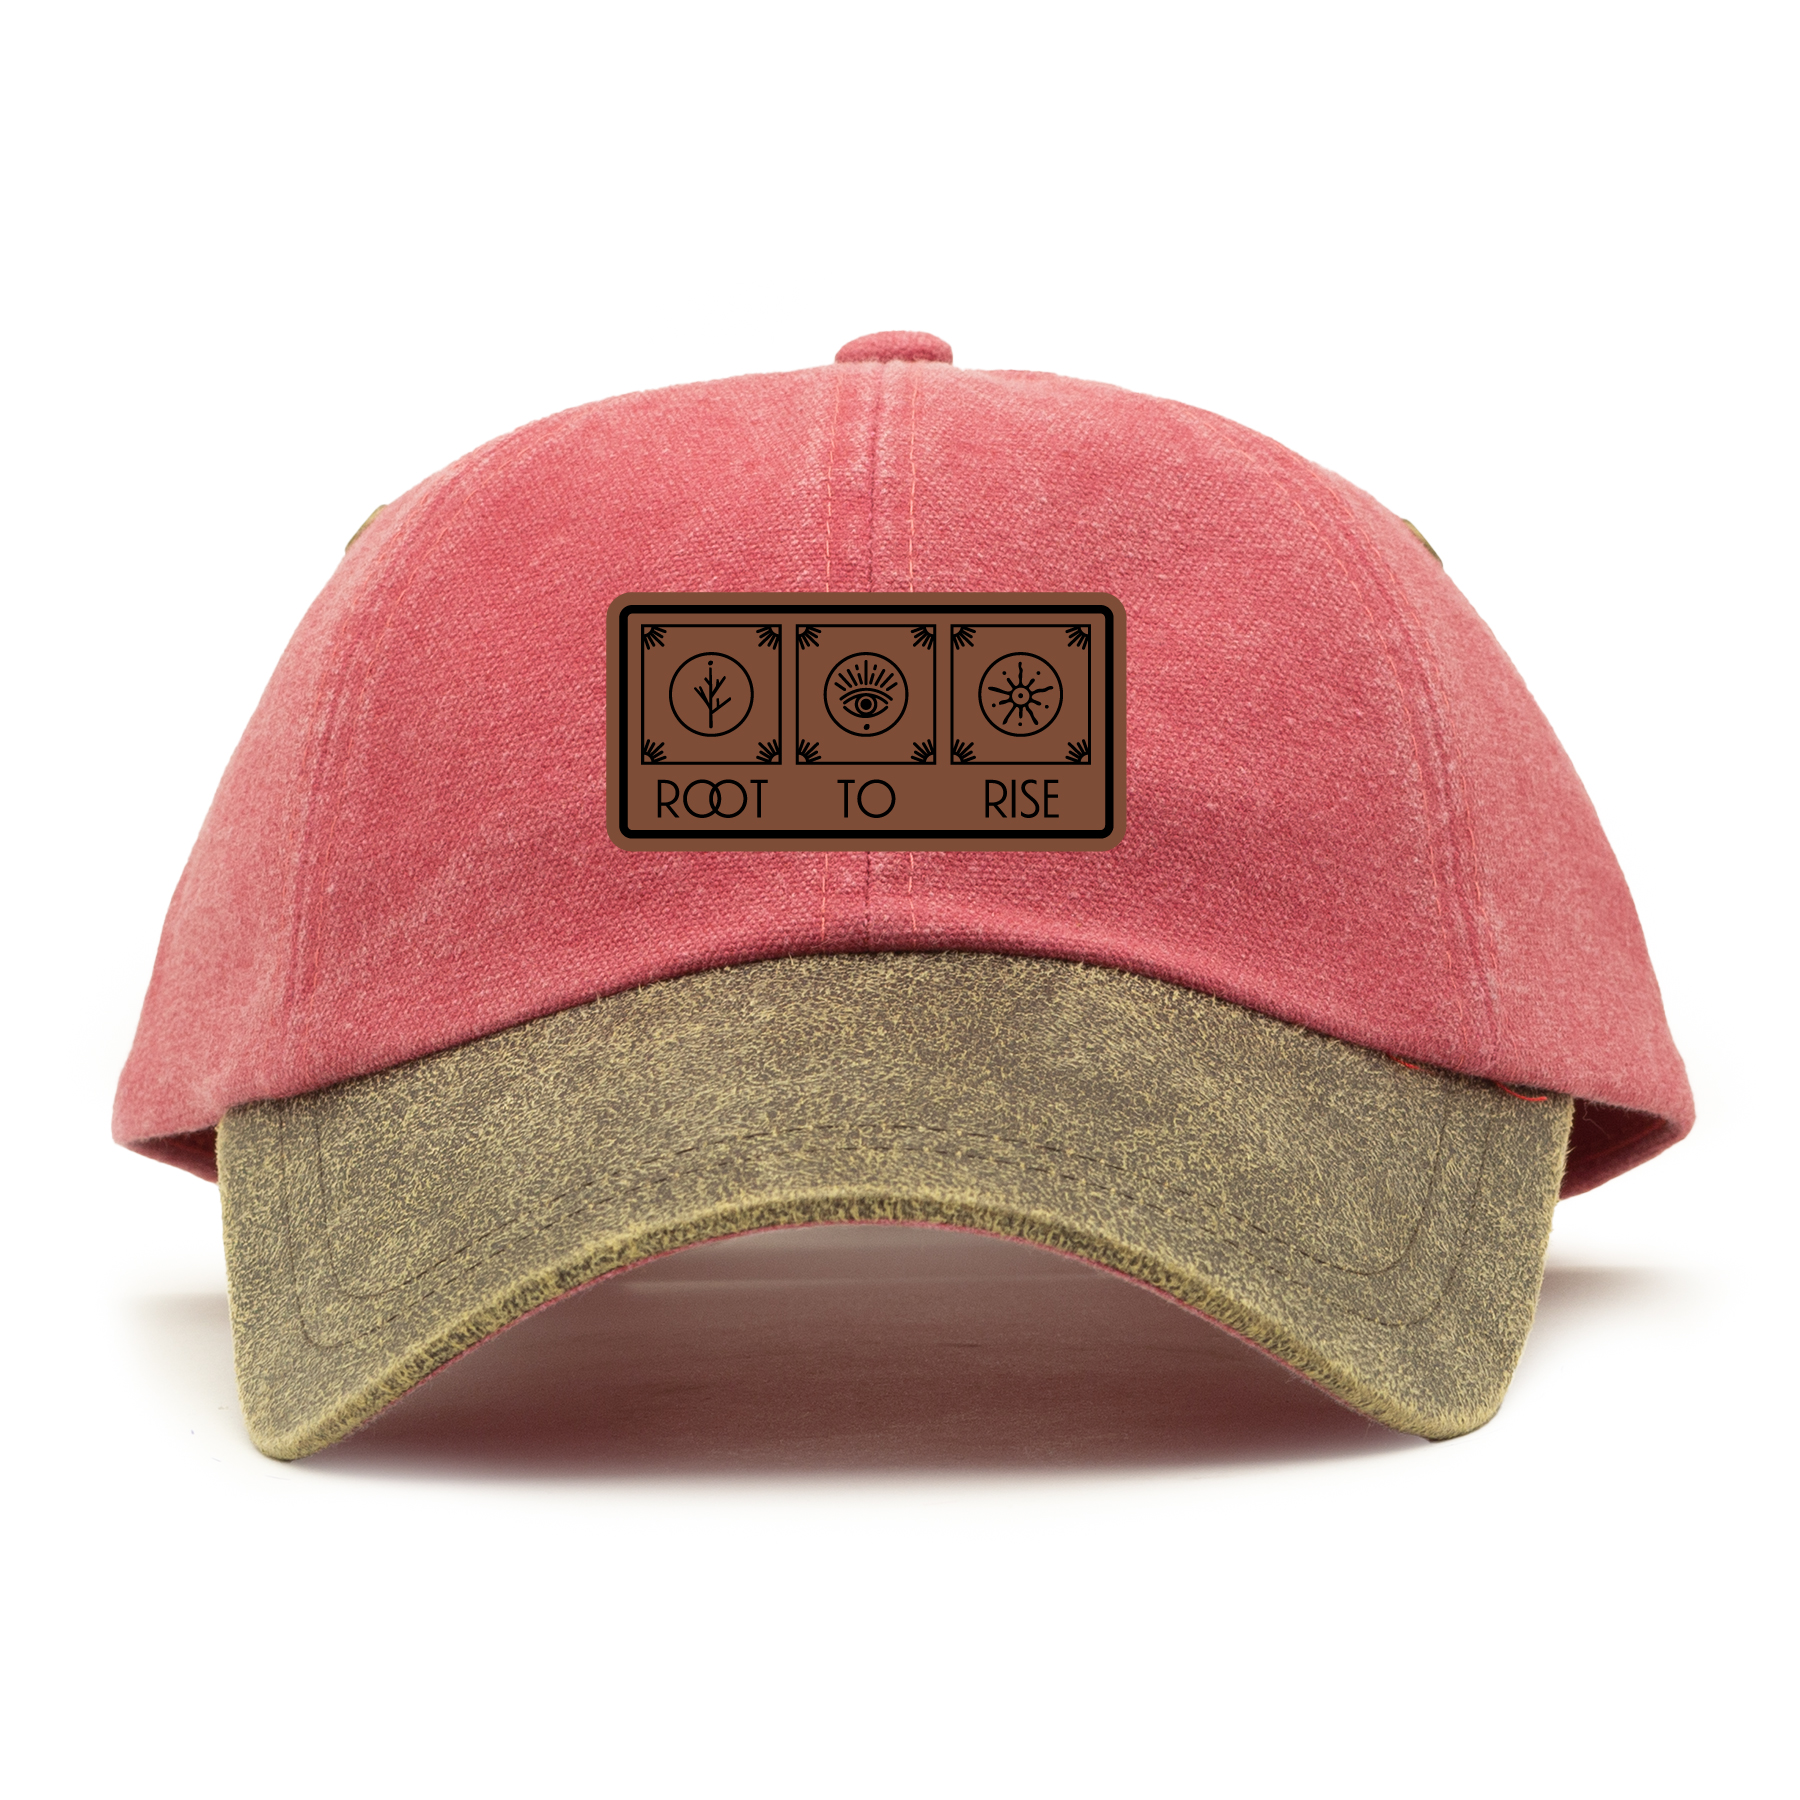 Root to Rise Yoga Cap Pink with logo